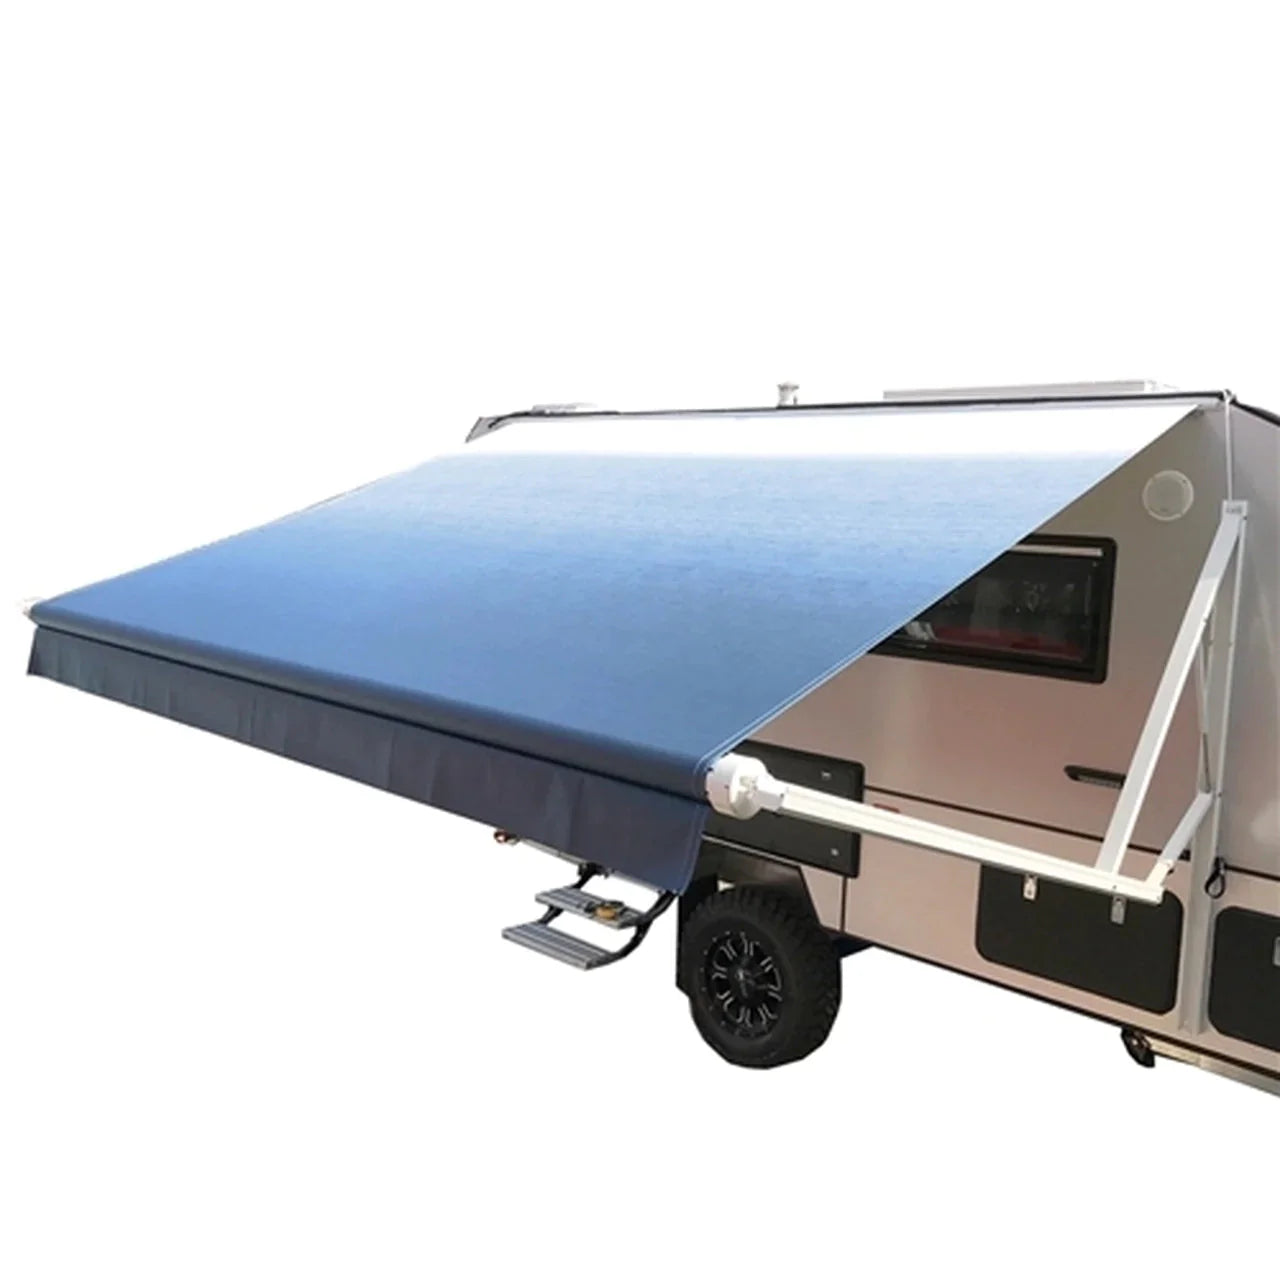 Aleko RV Awning Fabric Replacement - 18 X 8 ft (5.4 x 2.4 m)